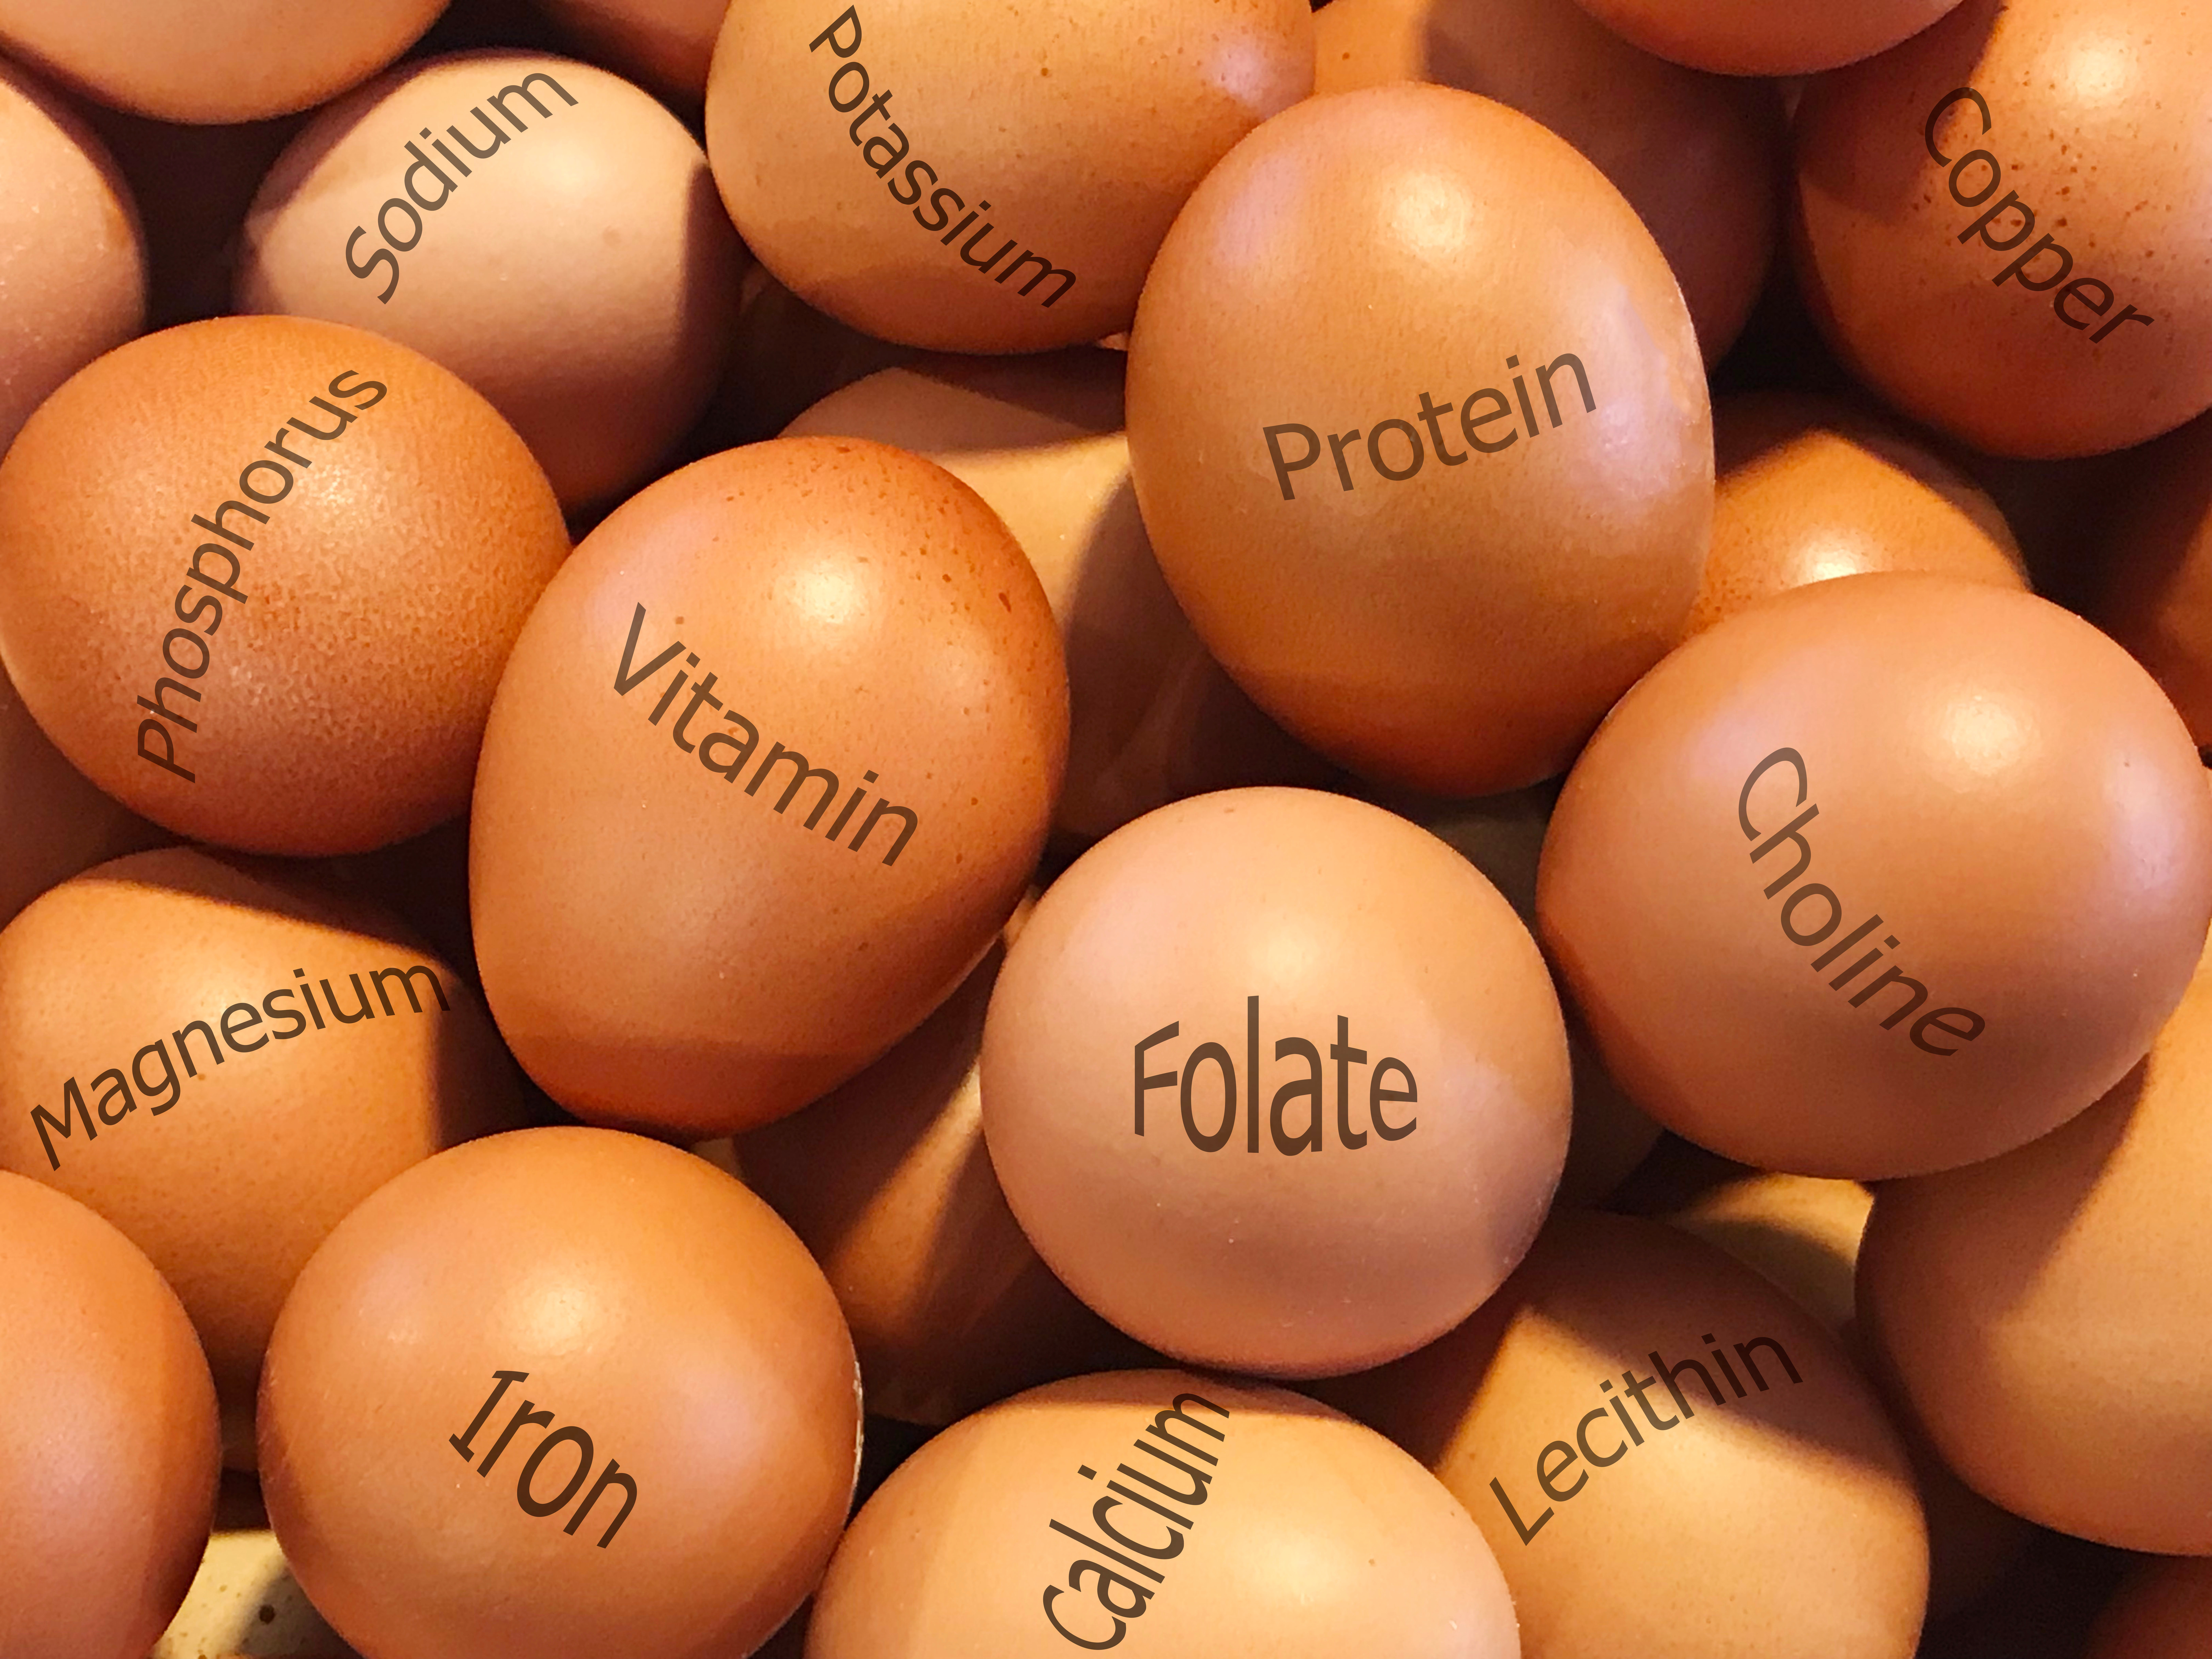 Fresh brown eggs with printed of nutrition facts on eggsshell.